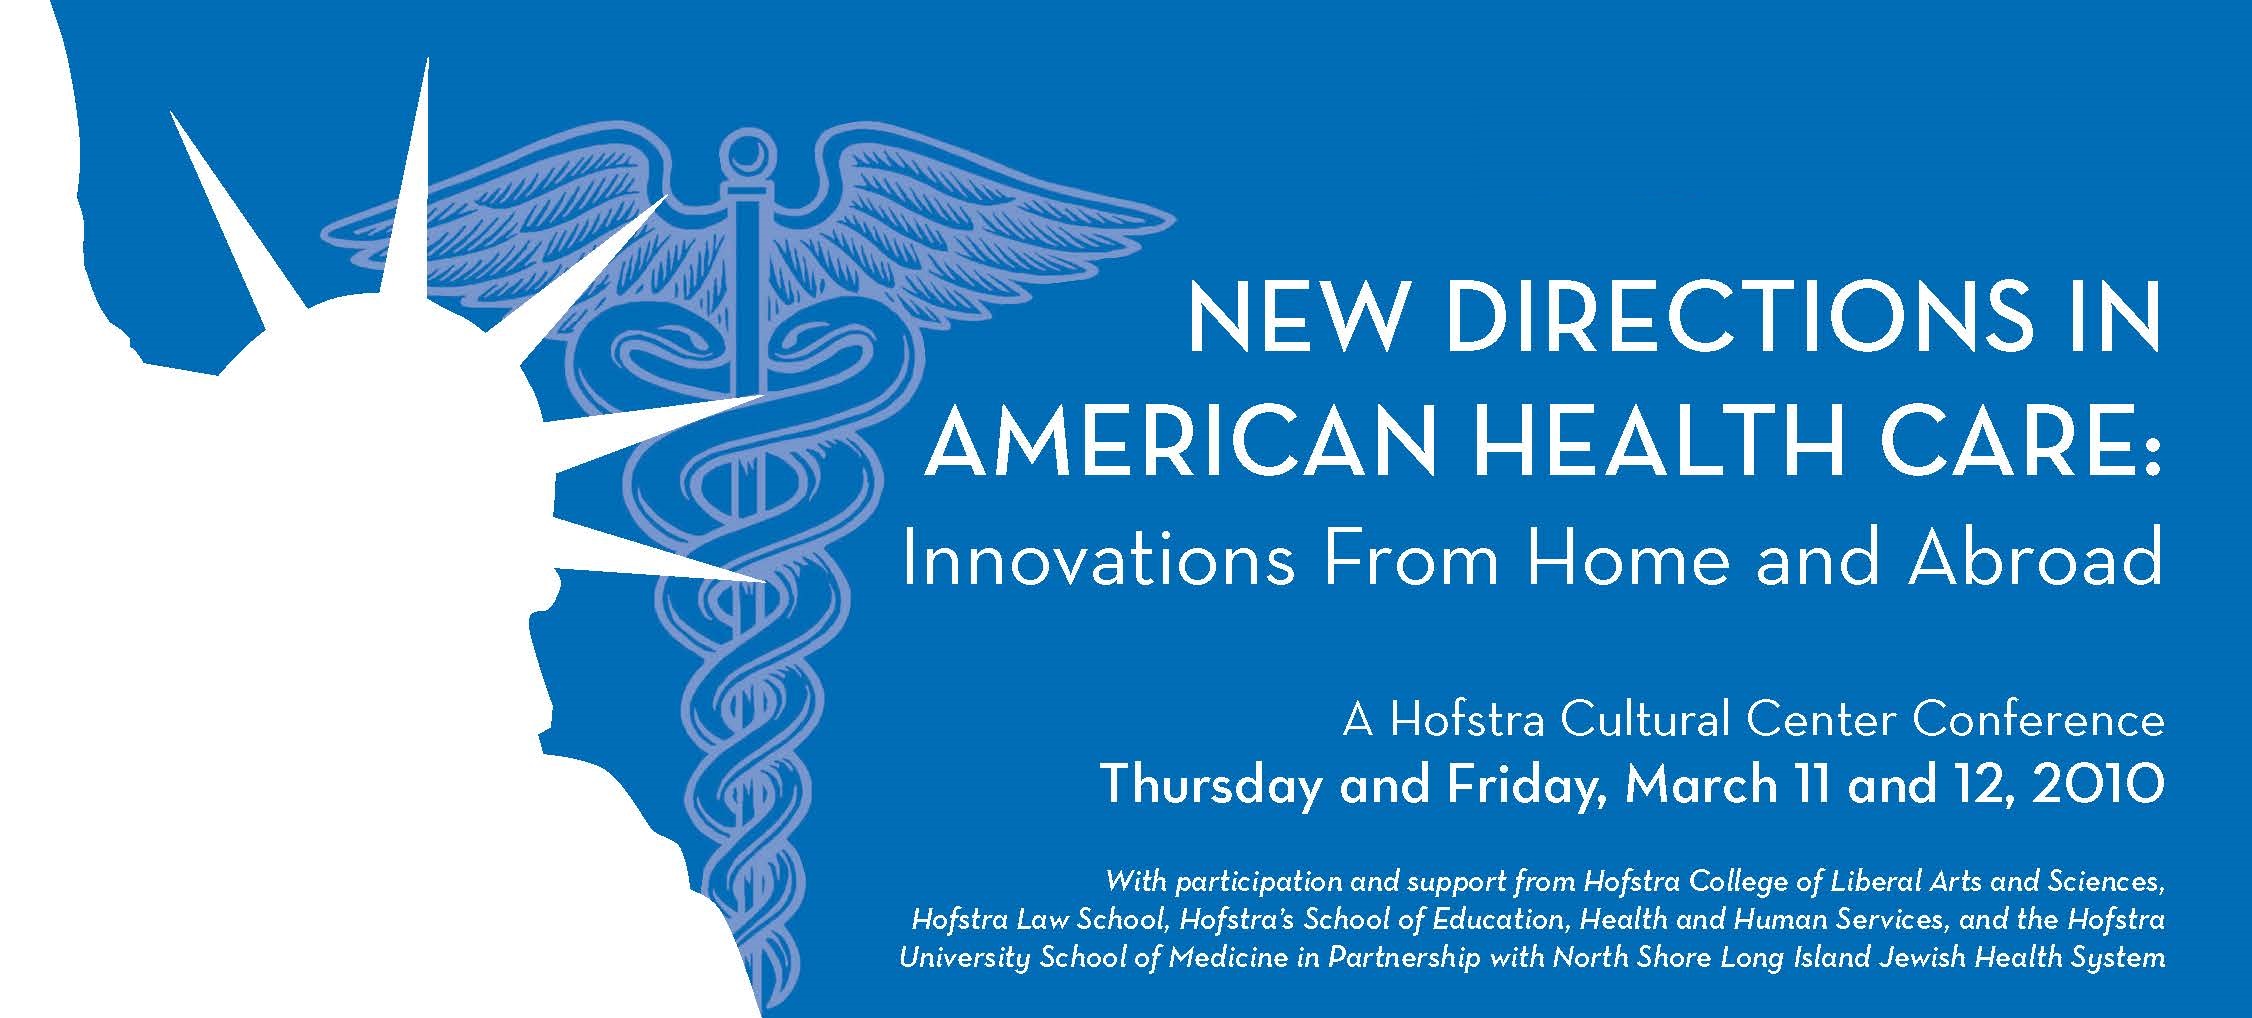 New Directions in American Health Care: Innovations From Home and Abroad (2010)